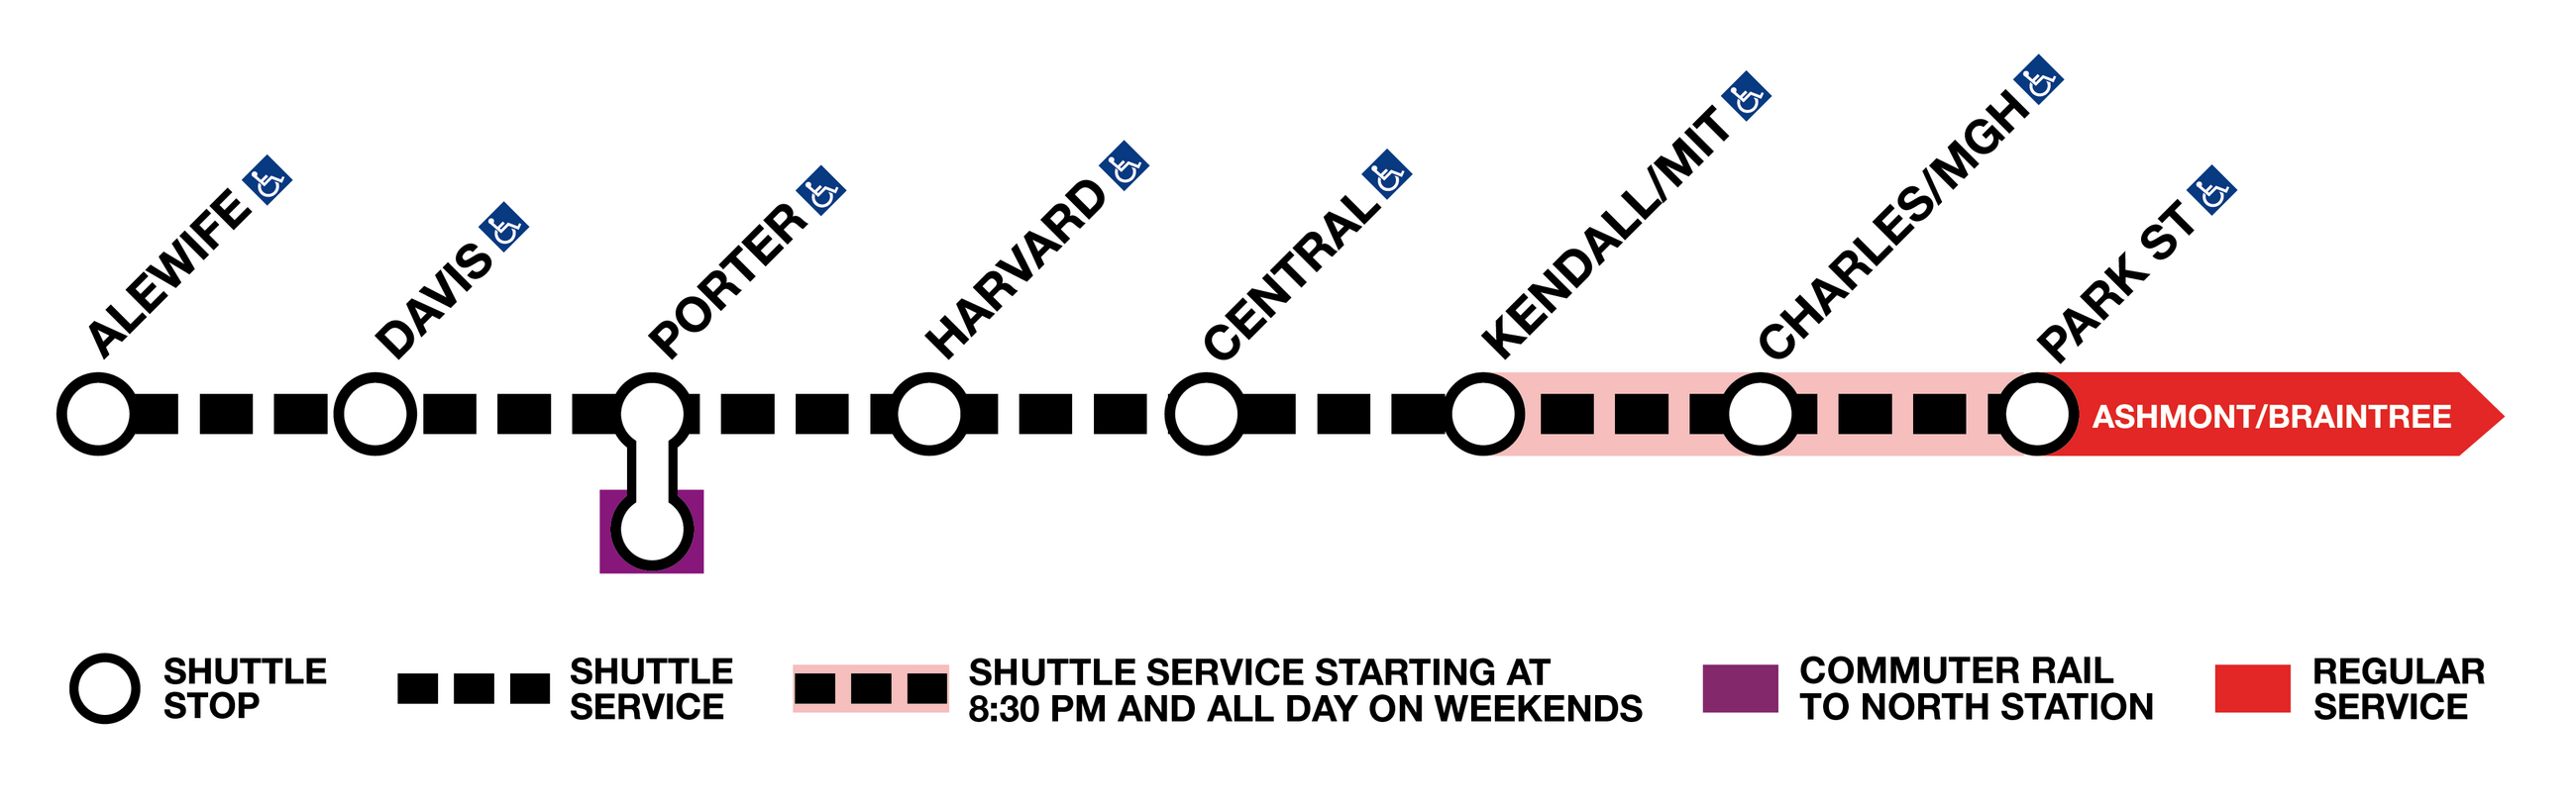 Shuttle service graphic for the Red Line closure.